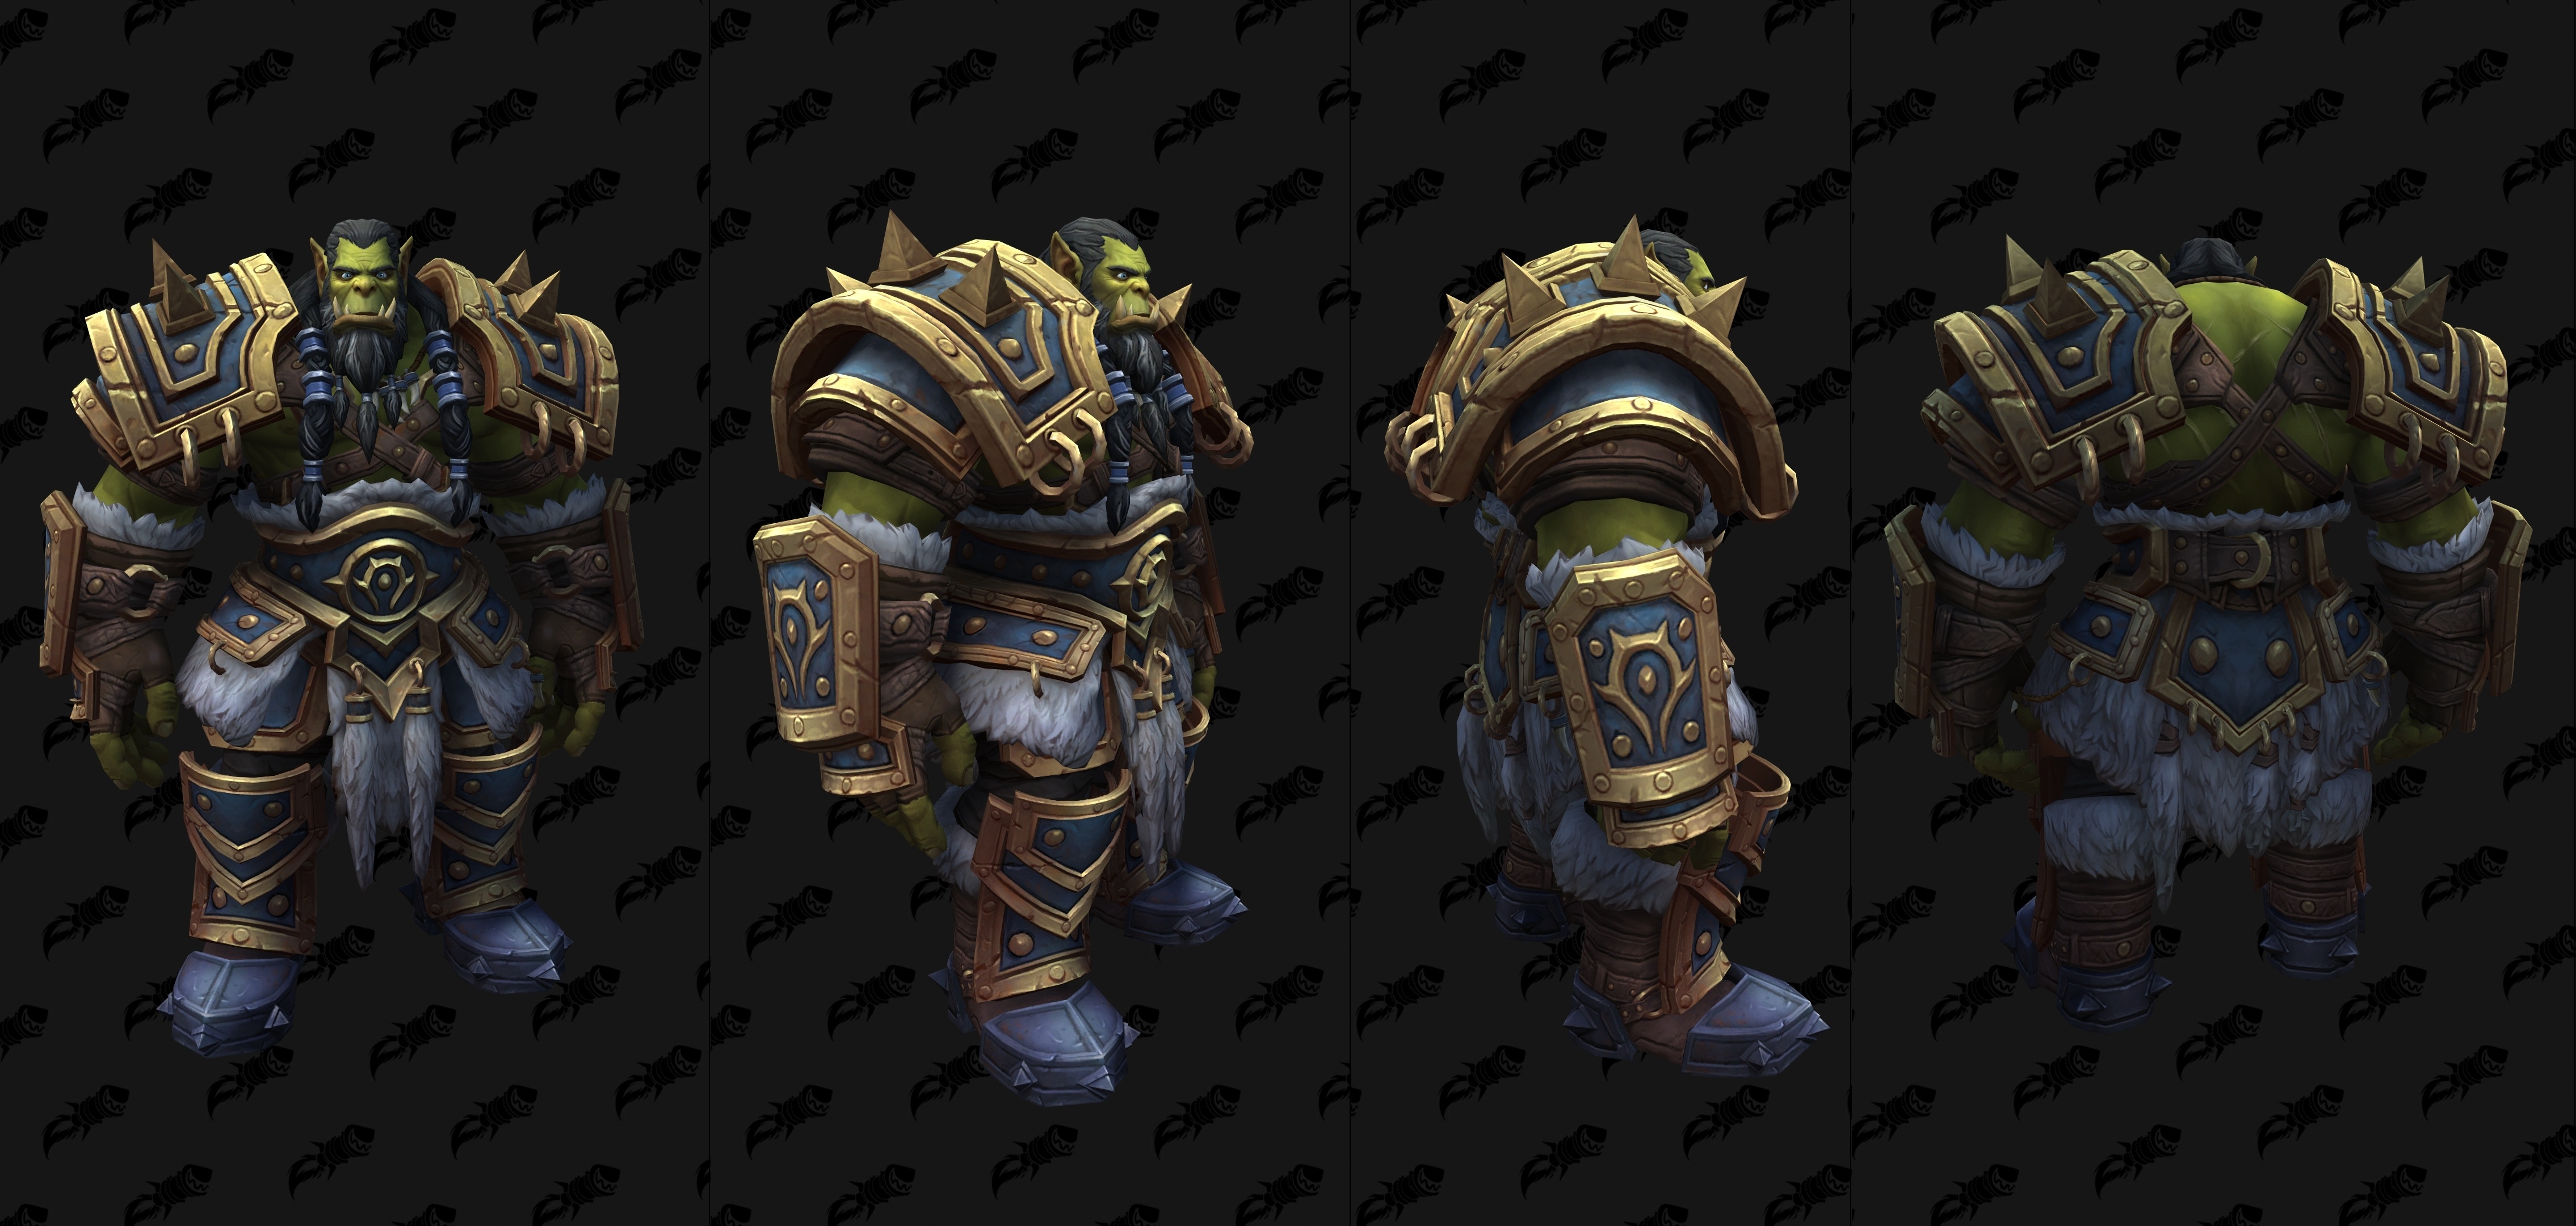 Thrall has received an updated model in Patch 9.1, with new armor that rese...